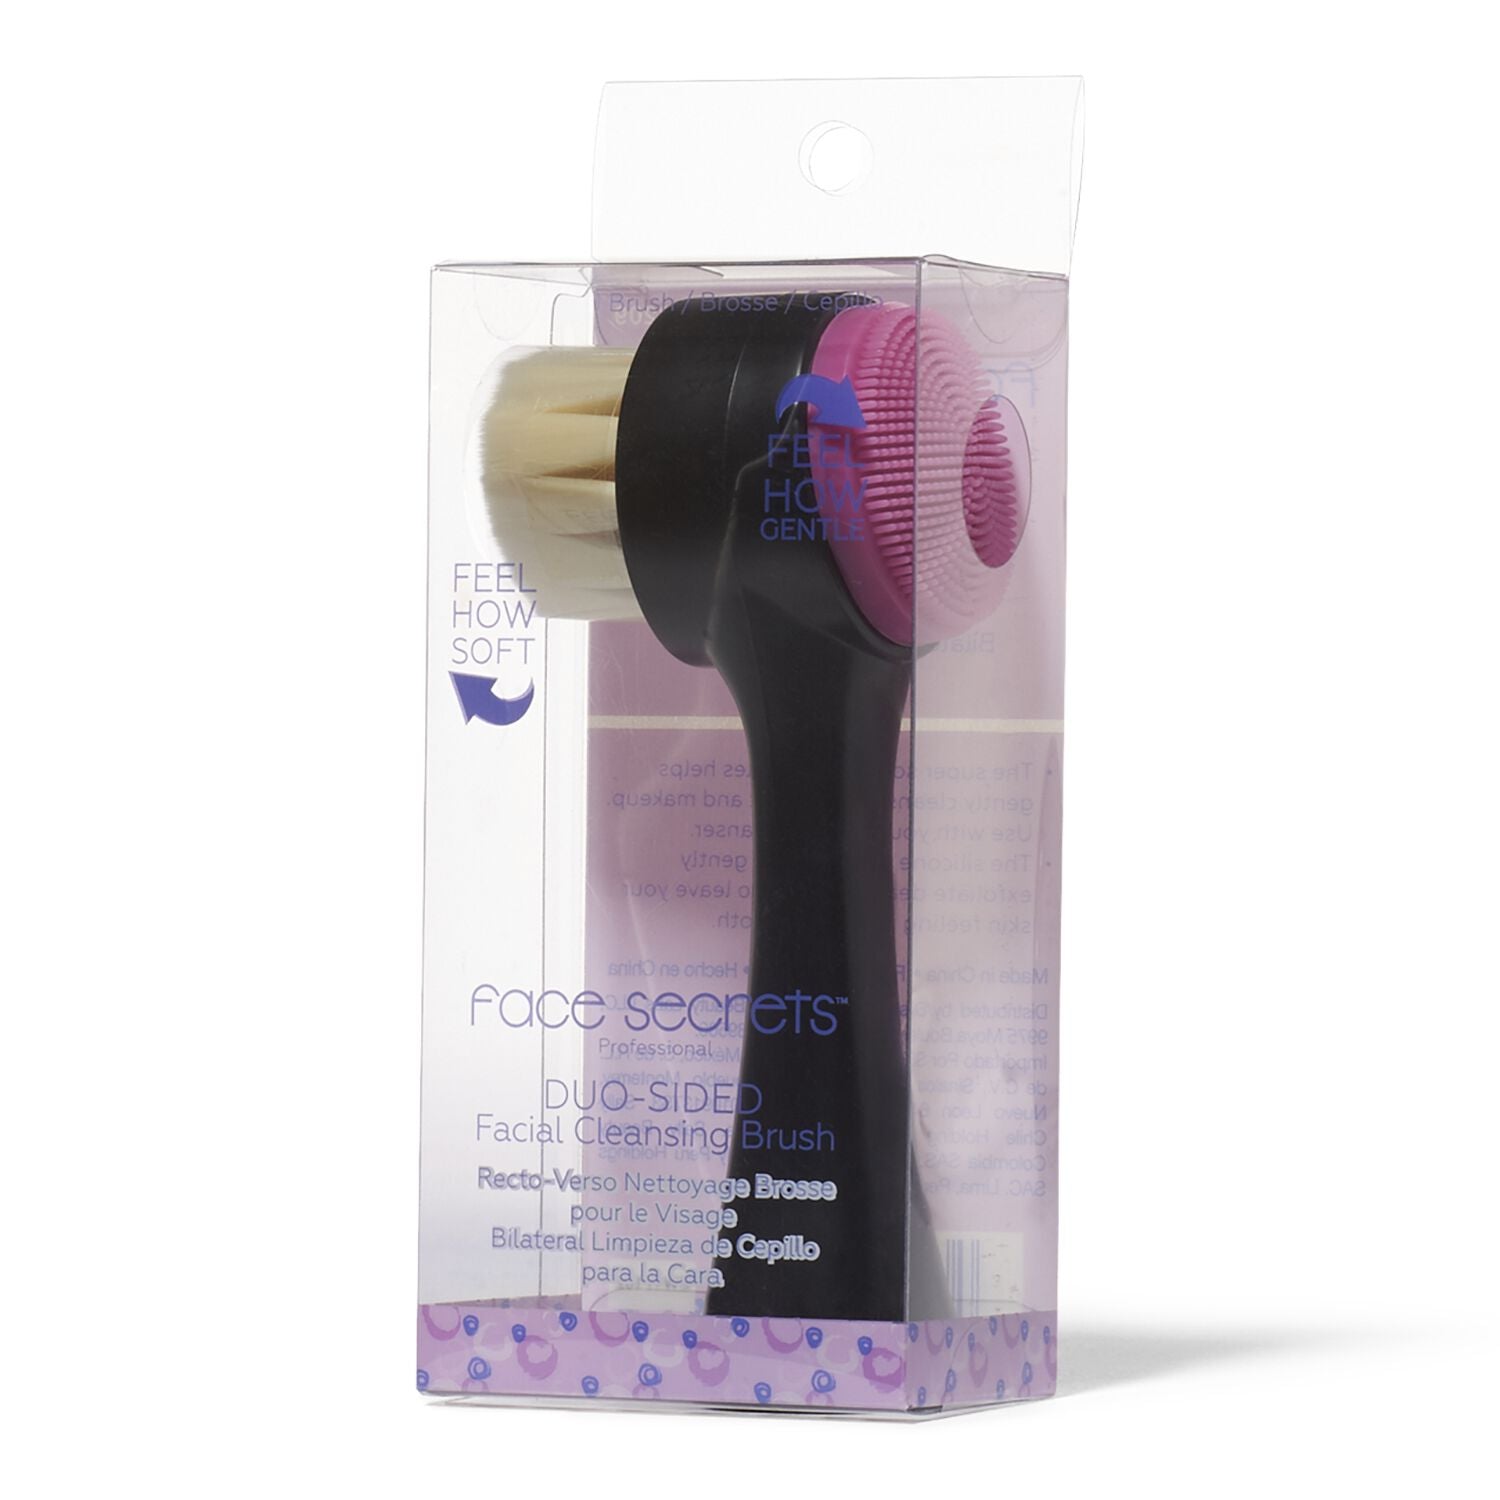 Face Secrets Duo-Sided Facial Cleansing Brush